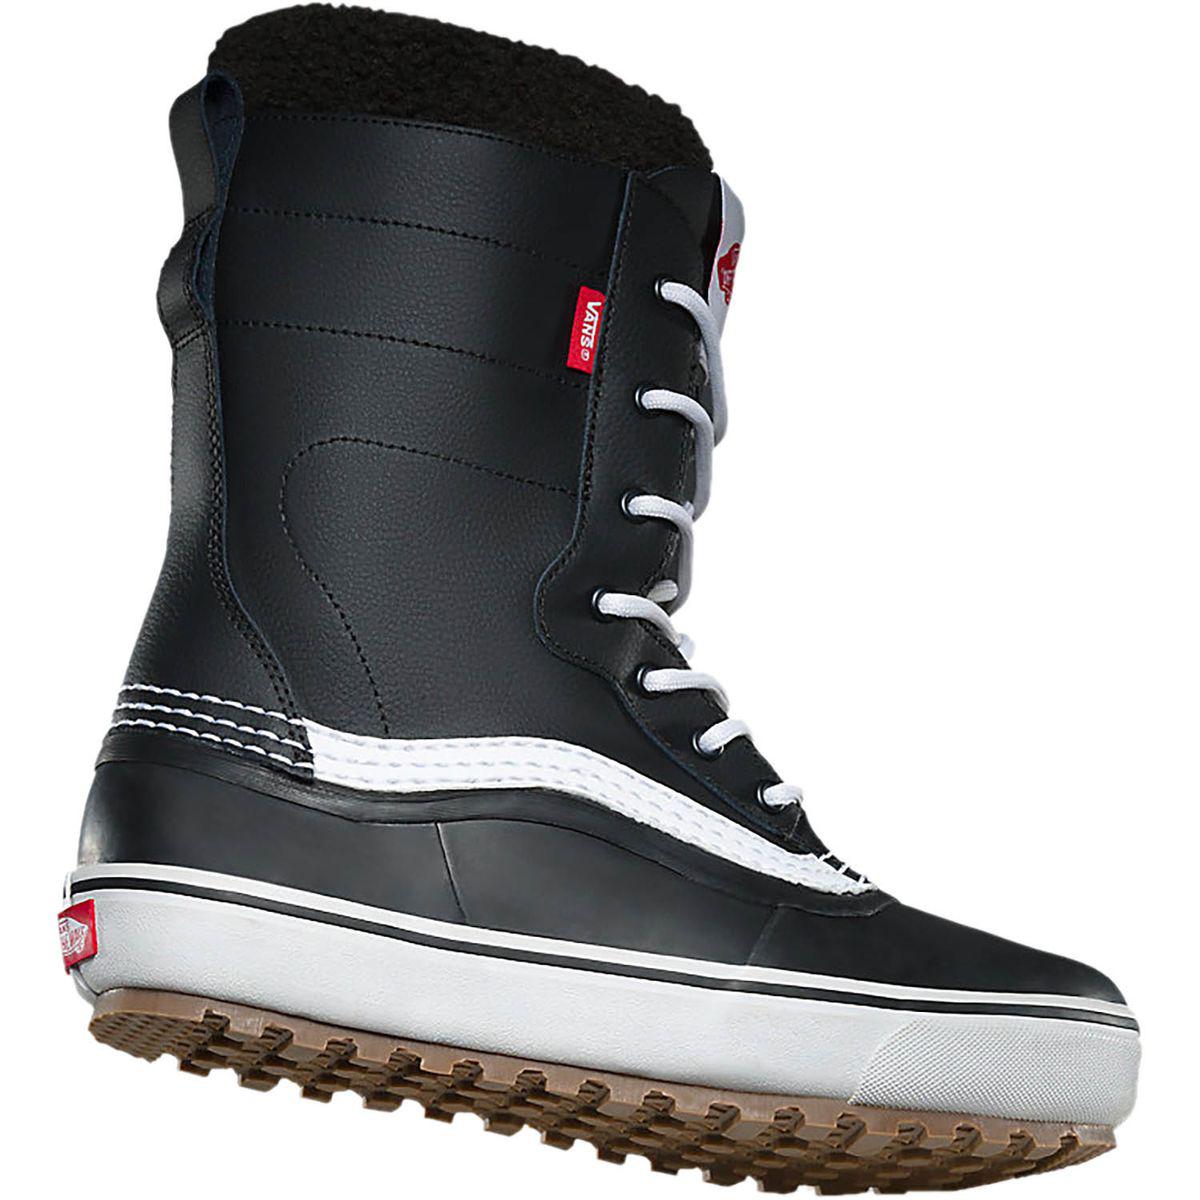 Vans Leather Remedy Snow Boot in Black 